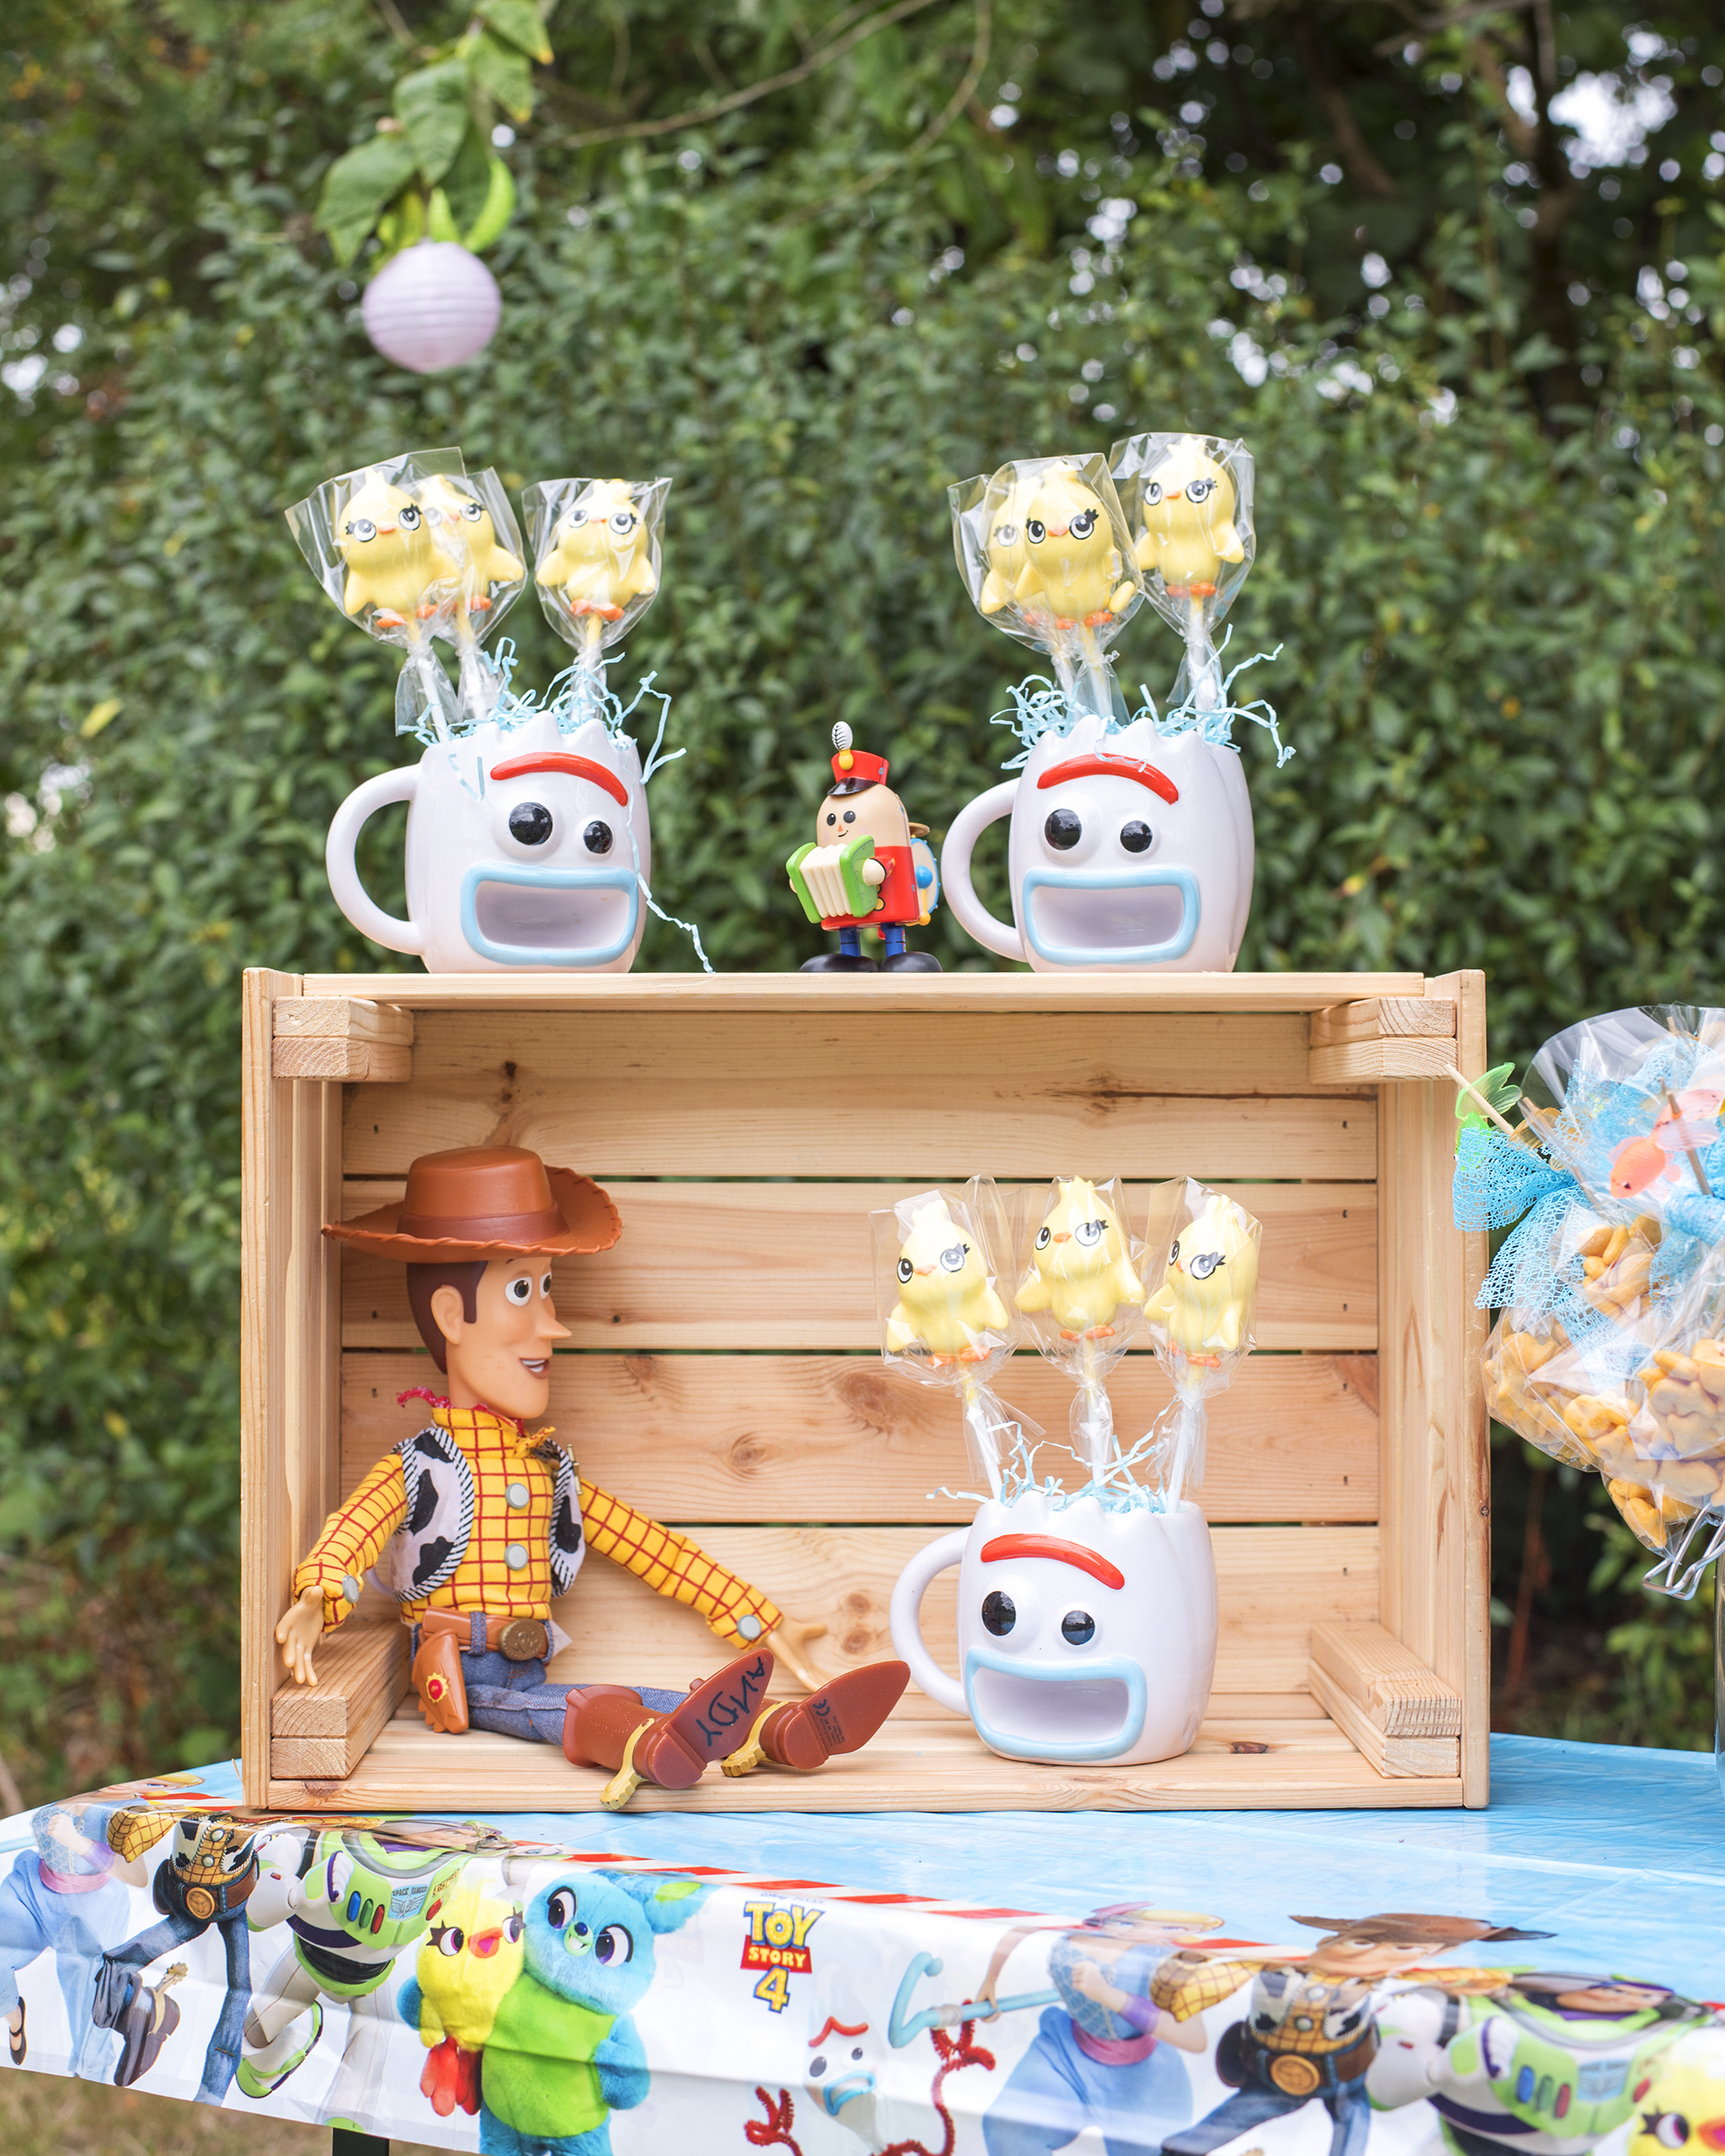 How to host a toy story party: Image shows a party table with a toy story tablecloth and wooden crate perched on top. Woody the Disney Cowboy toy sits inside the crate and three mugs in the shape of the face of Forky from Toy Story Four are sat on and in the crate. Inside the mugs are Ducky cake pops. The table is outdoors at a toy story party.